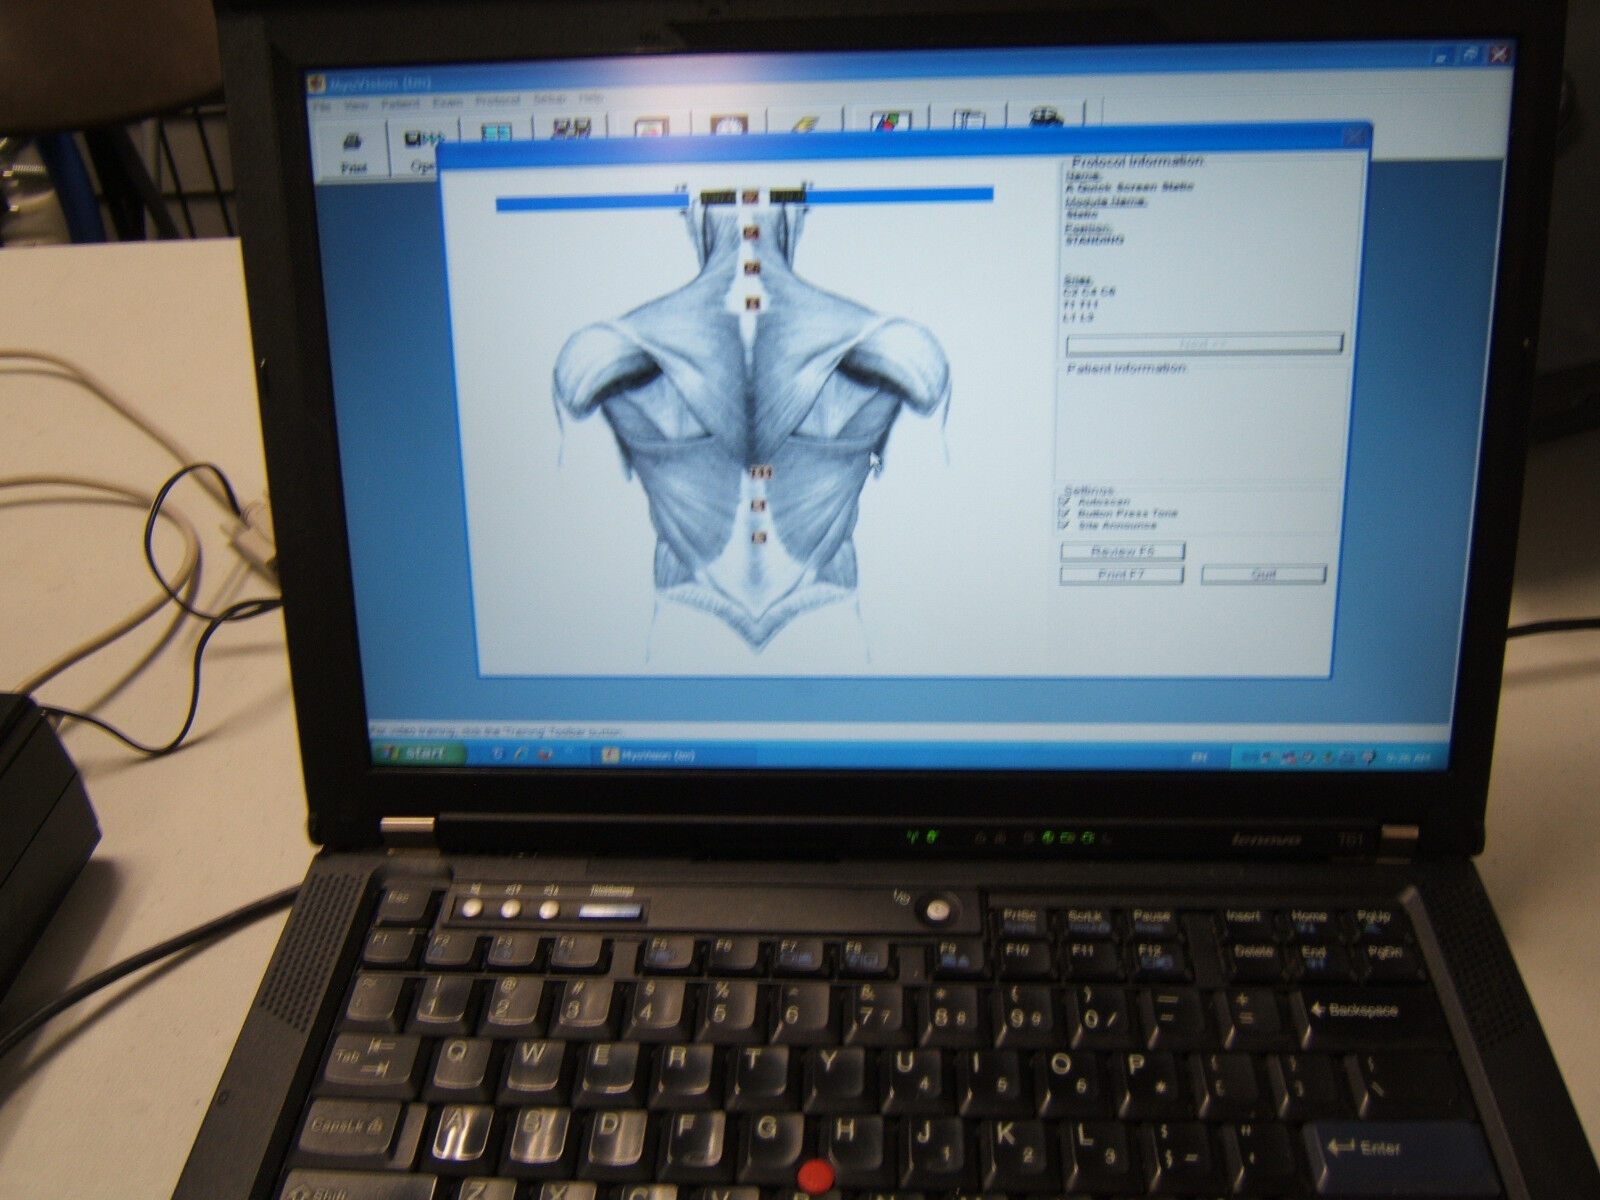 Laptop w/Validated Myovision 8000 Software Installed, Ready to Use Chiropractor